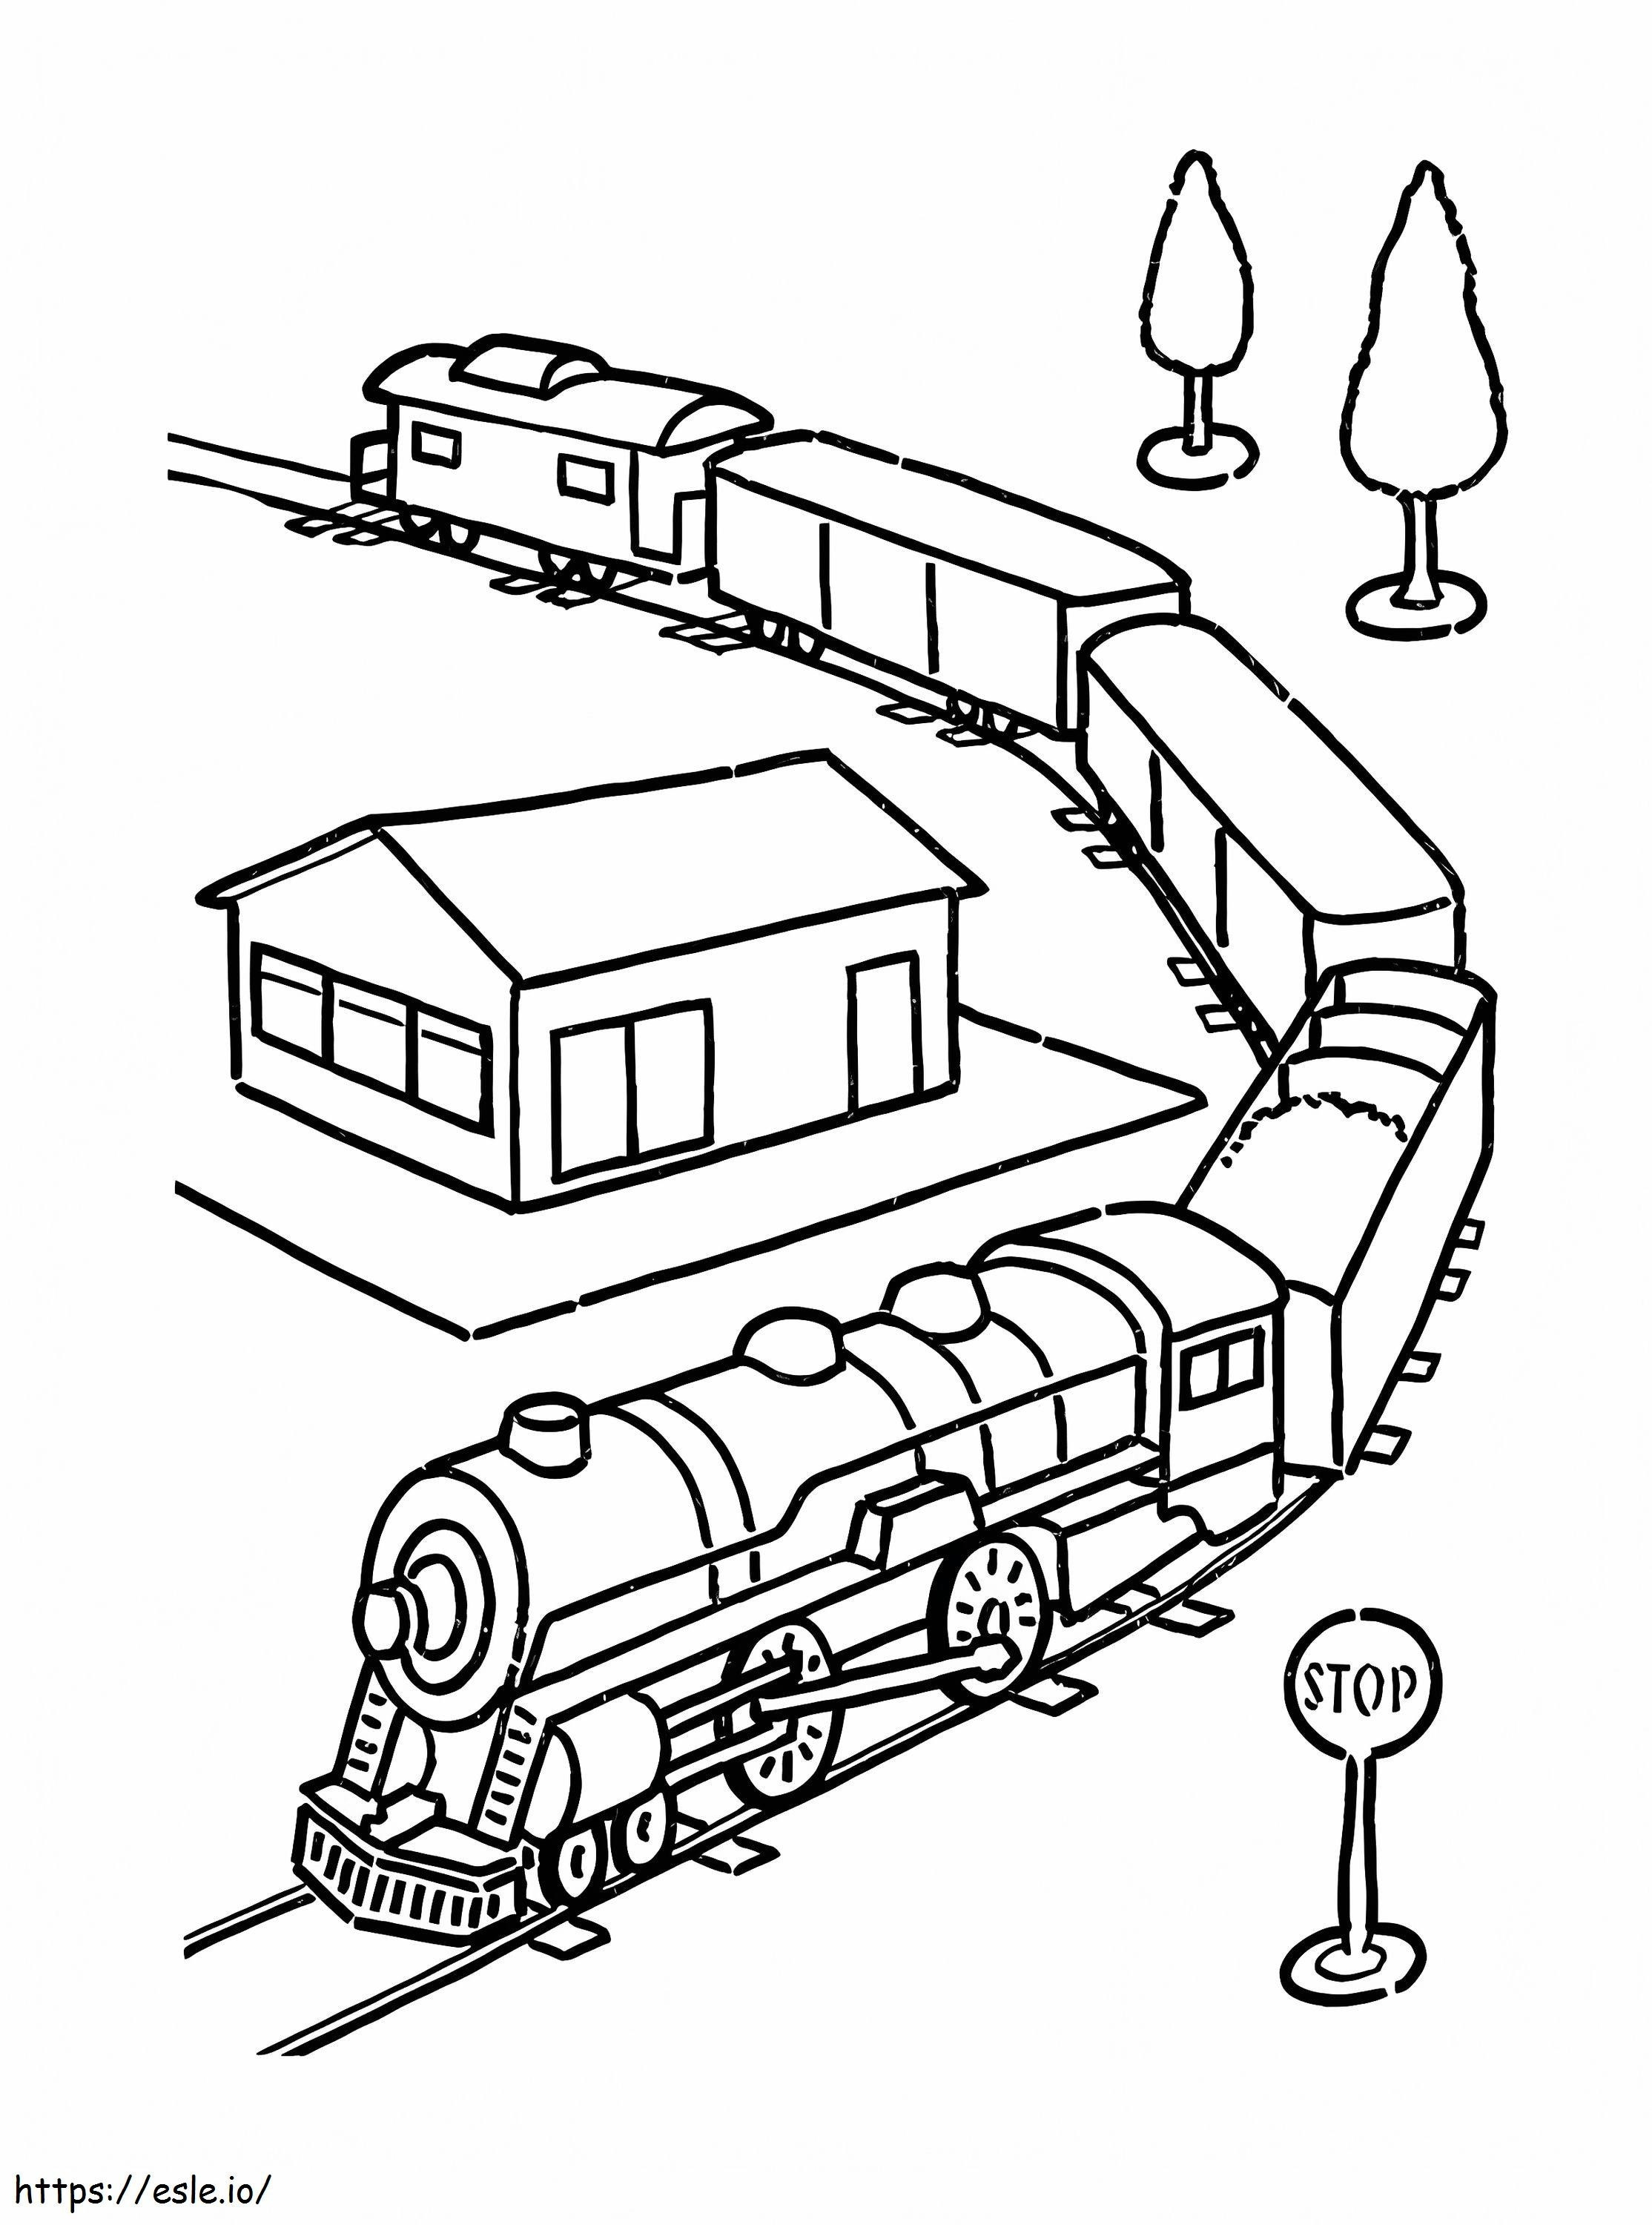 The Polar Express Printable coloring page